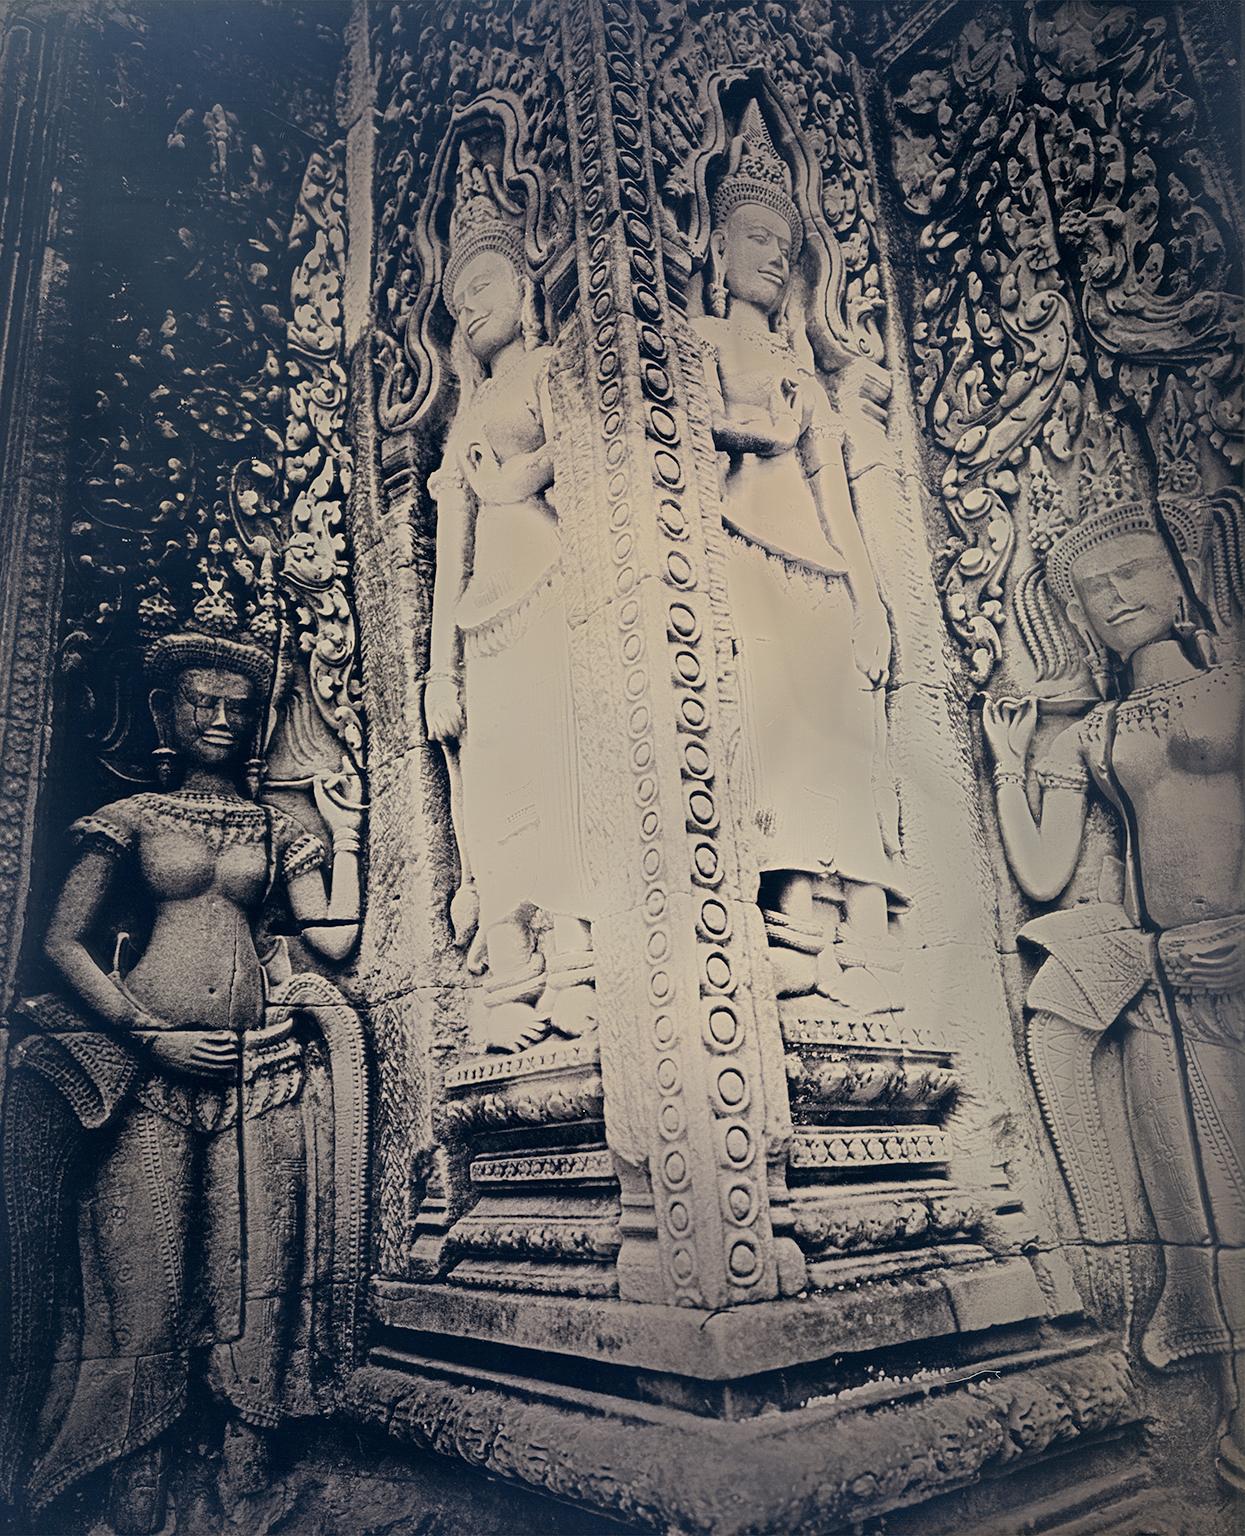 Binh Danh Figurative Photograph - "Divinities of Angkor Wat #1" daguerreotype on silver cambodia temple wall 